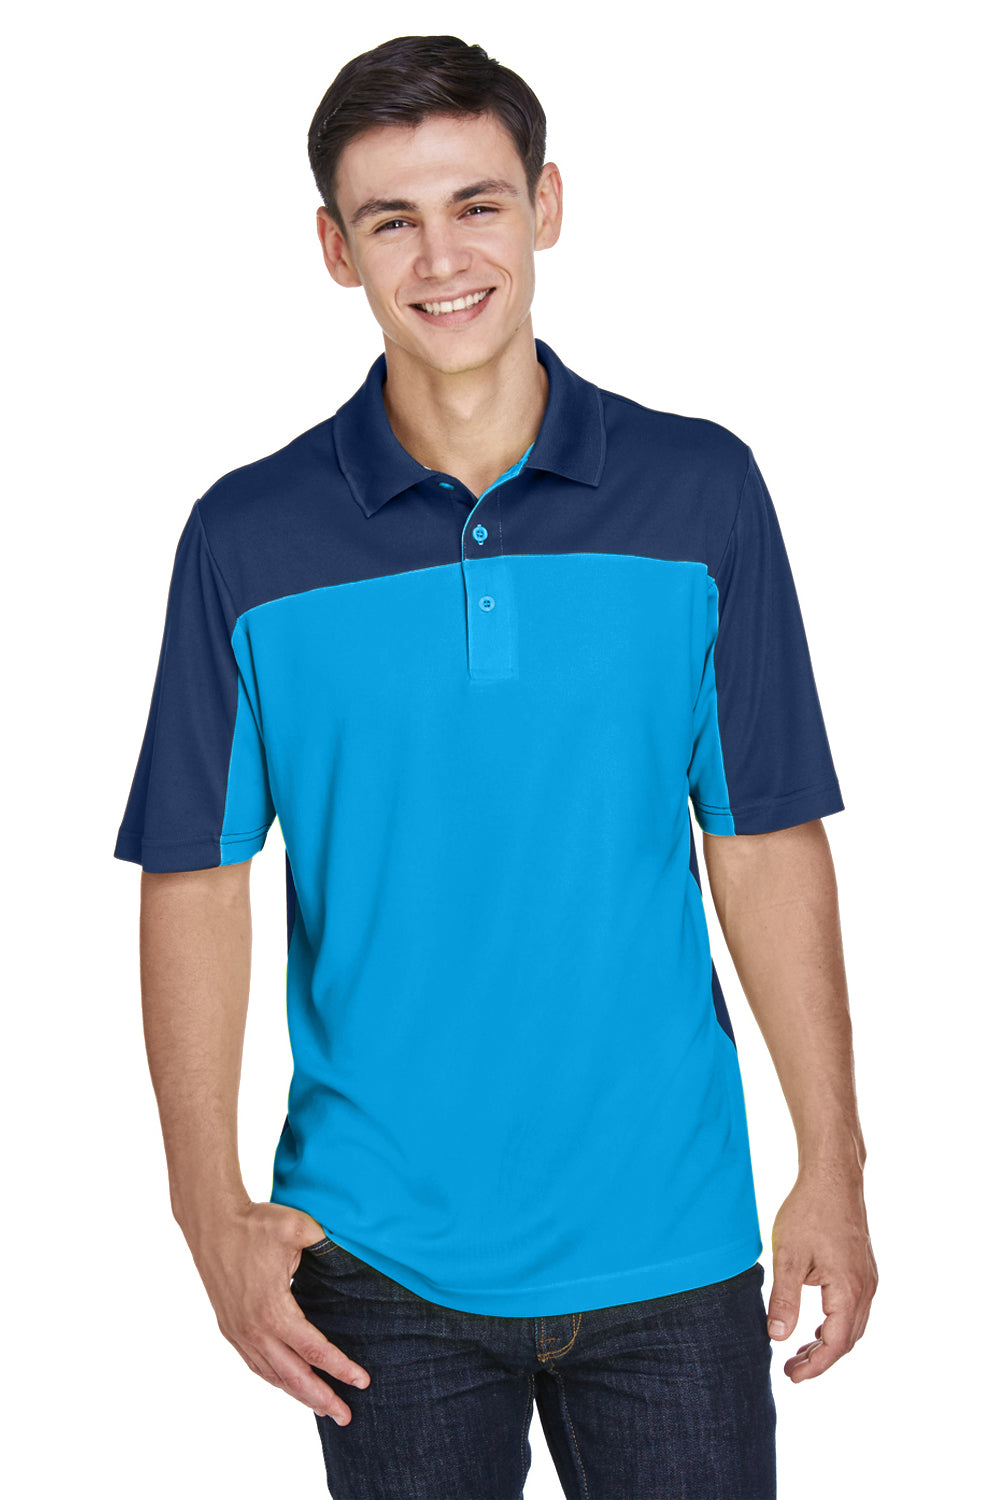 Core 365 CE101 Mens Balance Performance Moisture Wicking Short Sleeve Polo Shirt Electric Blue/Navy Blue Front